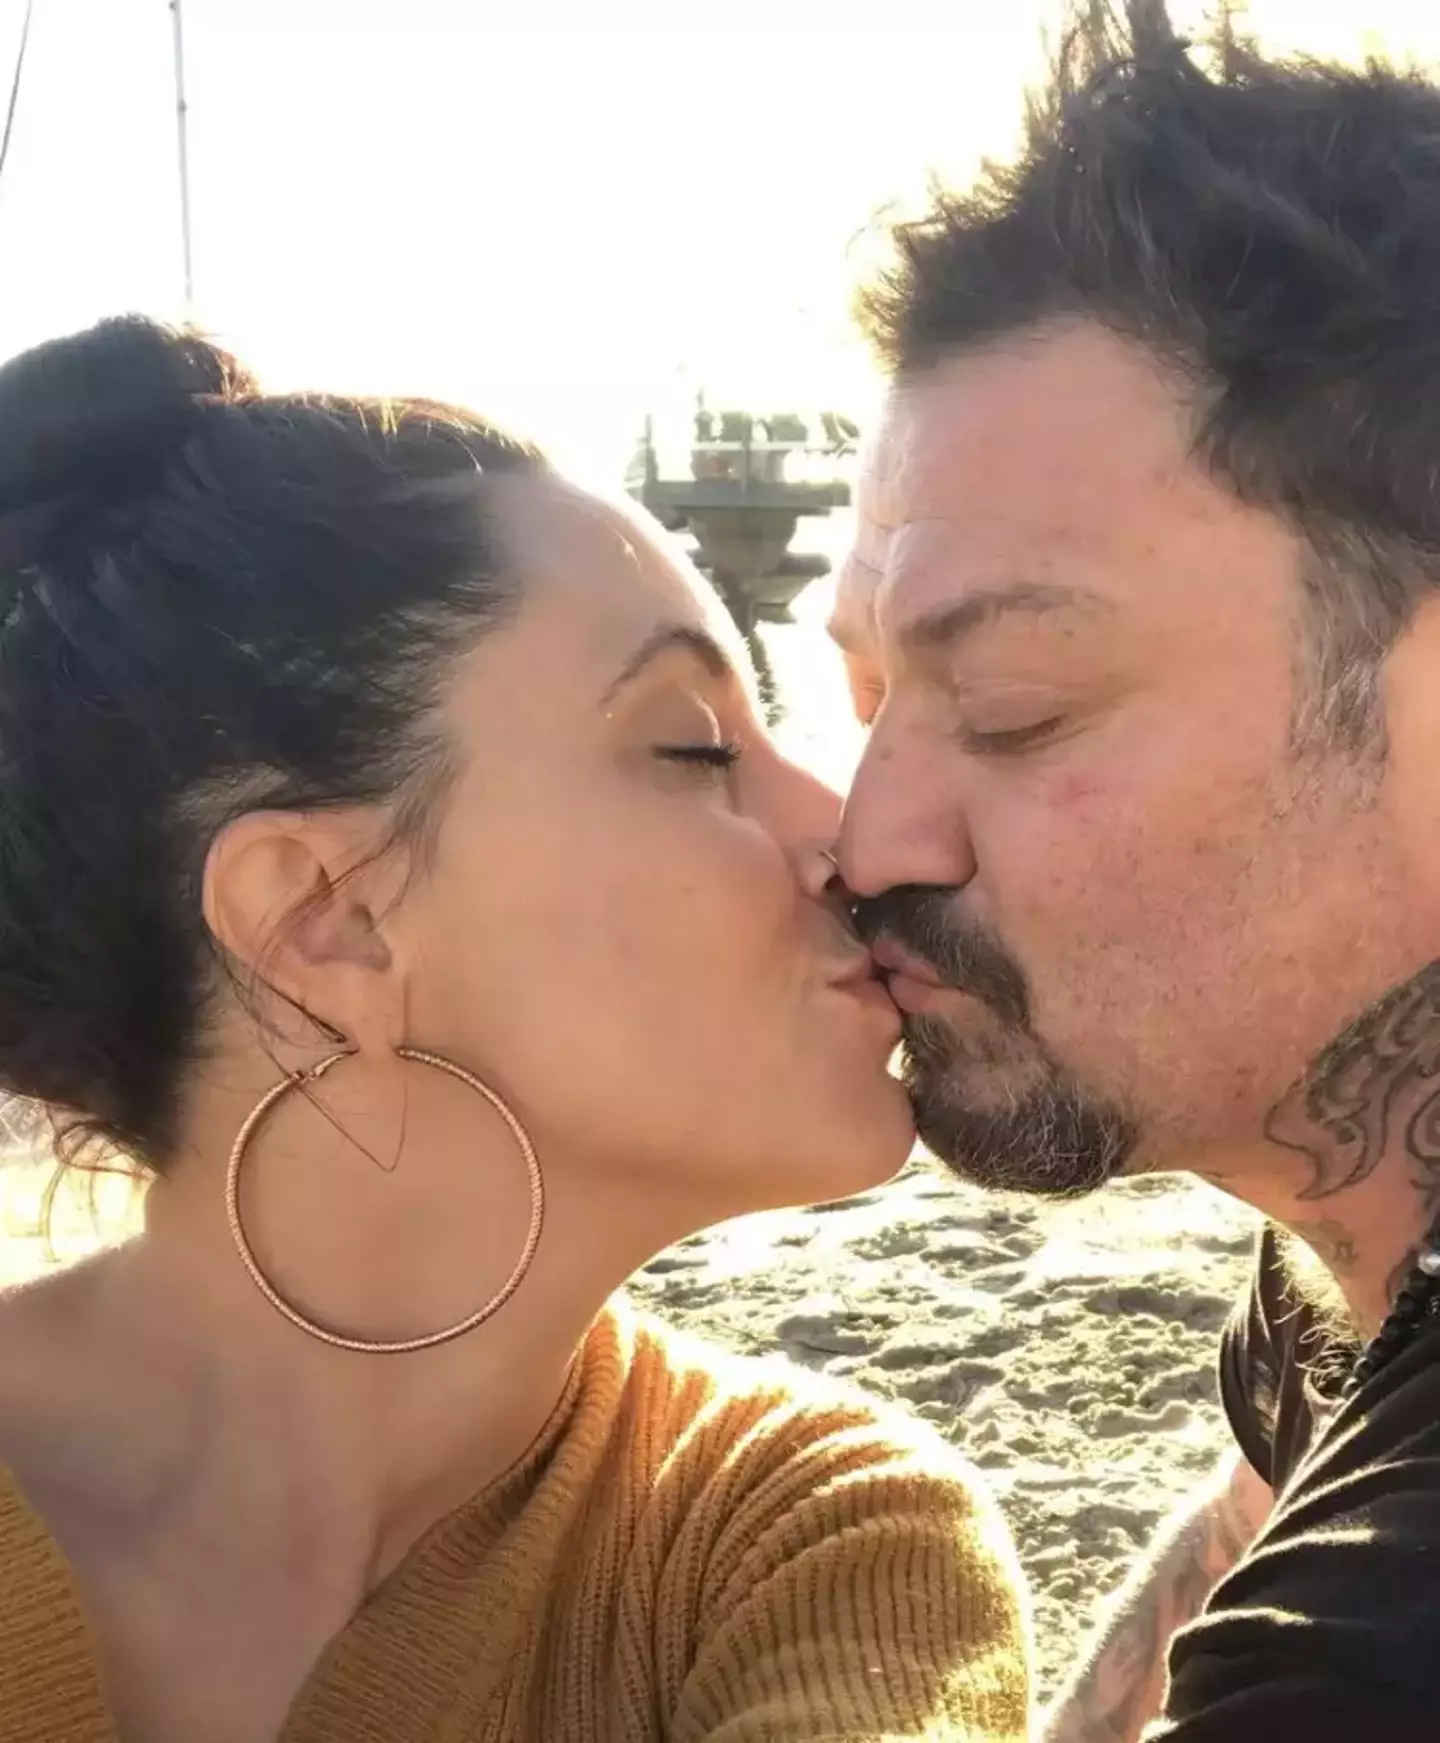 Bam Margera has claimed he was 'never legally married' to Nicole Boyd as she files for separation.